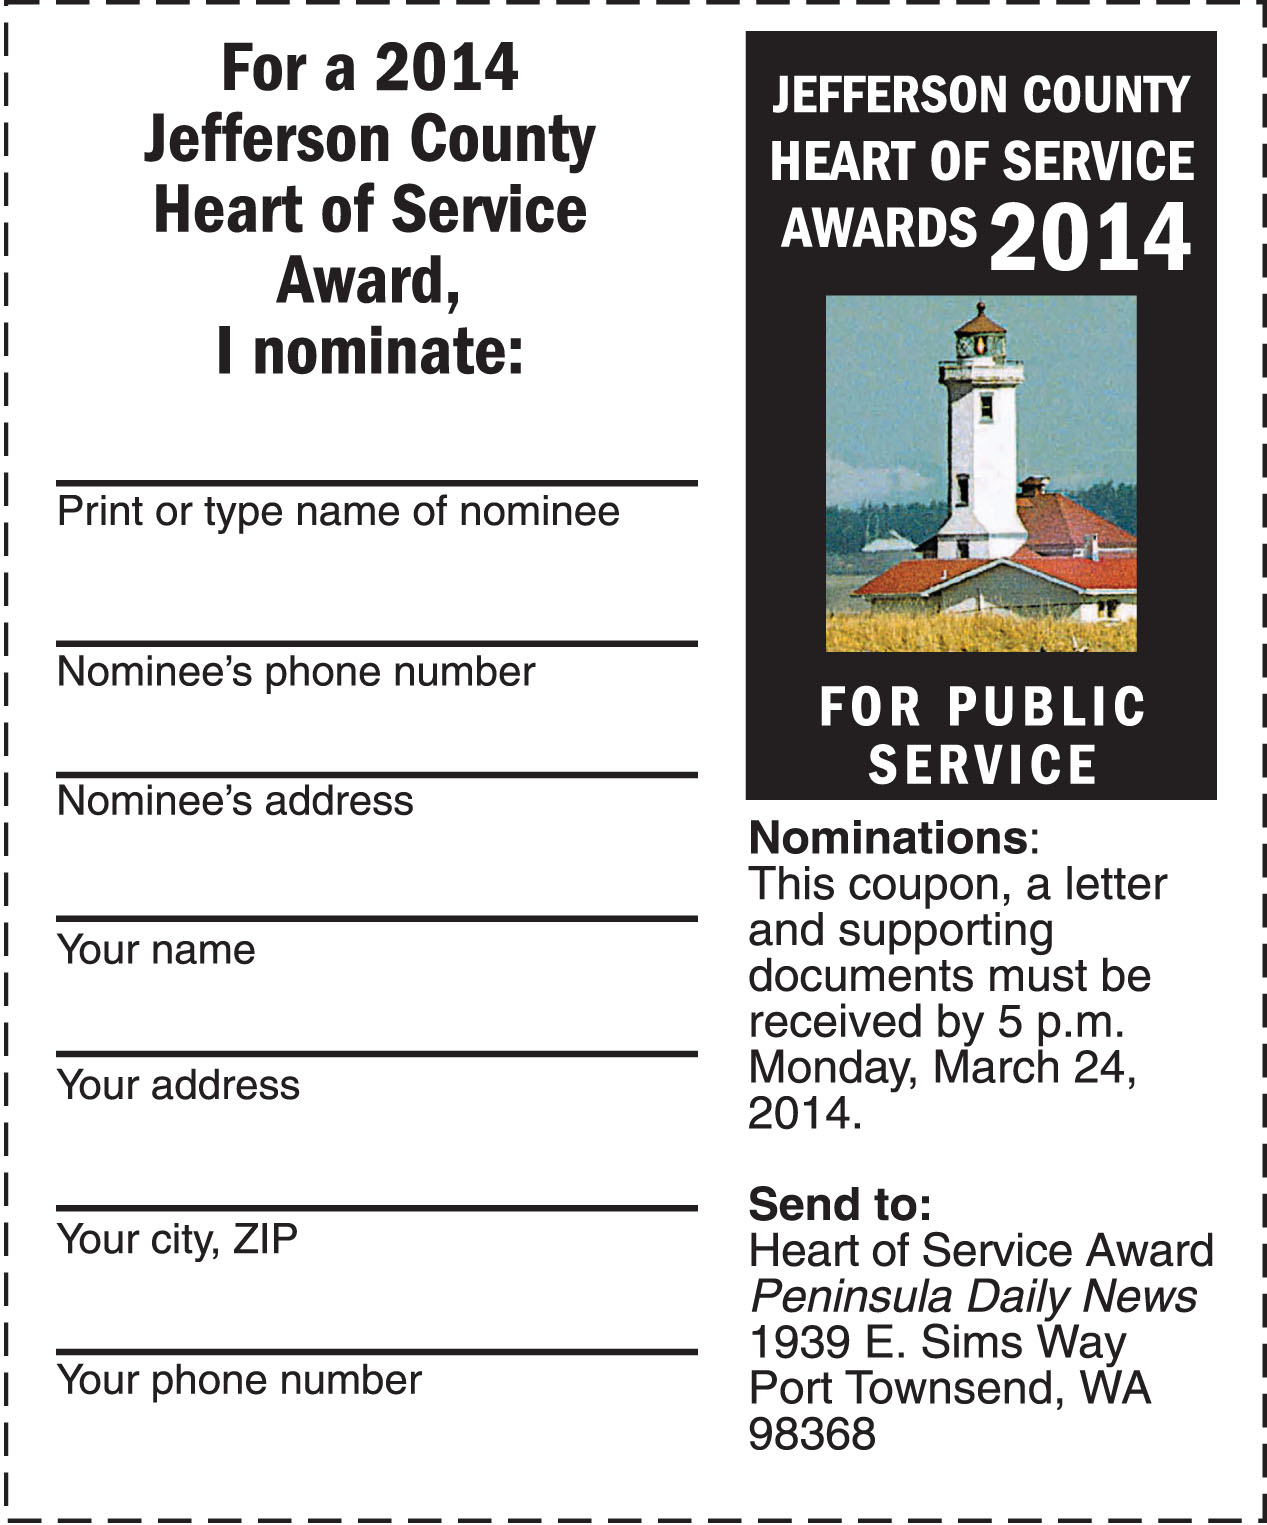 Wanted: A few good Jefferson County heroes for Heart of Service award